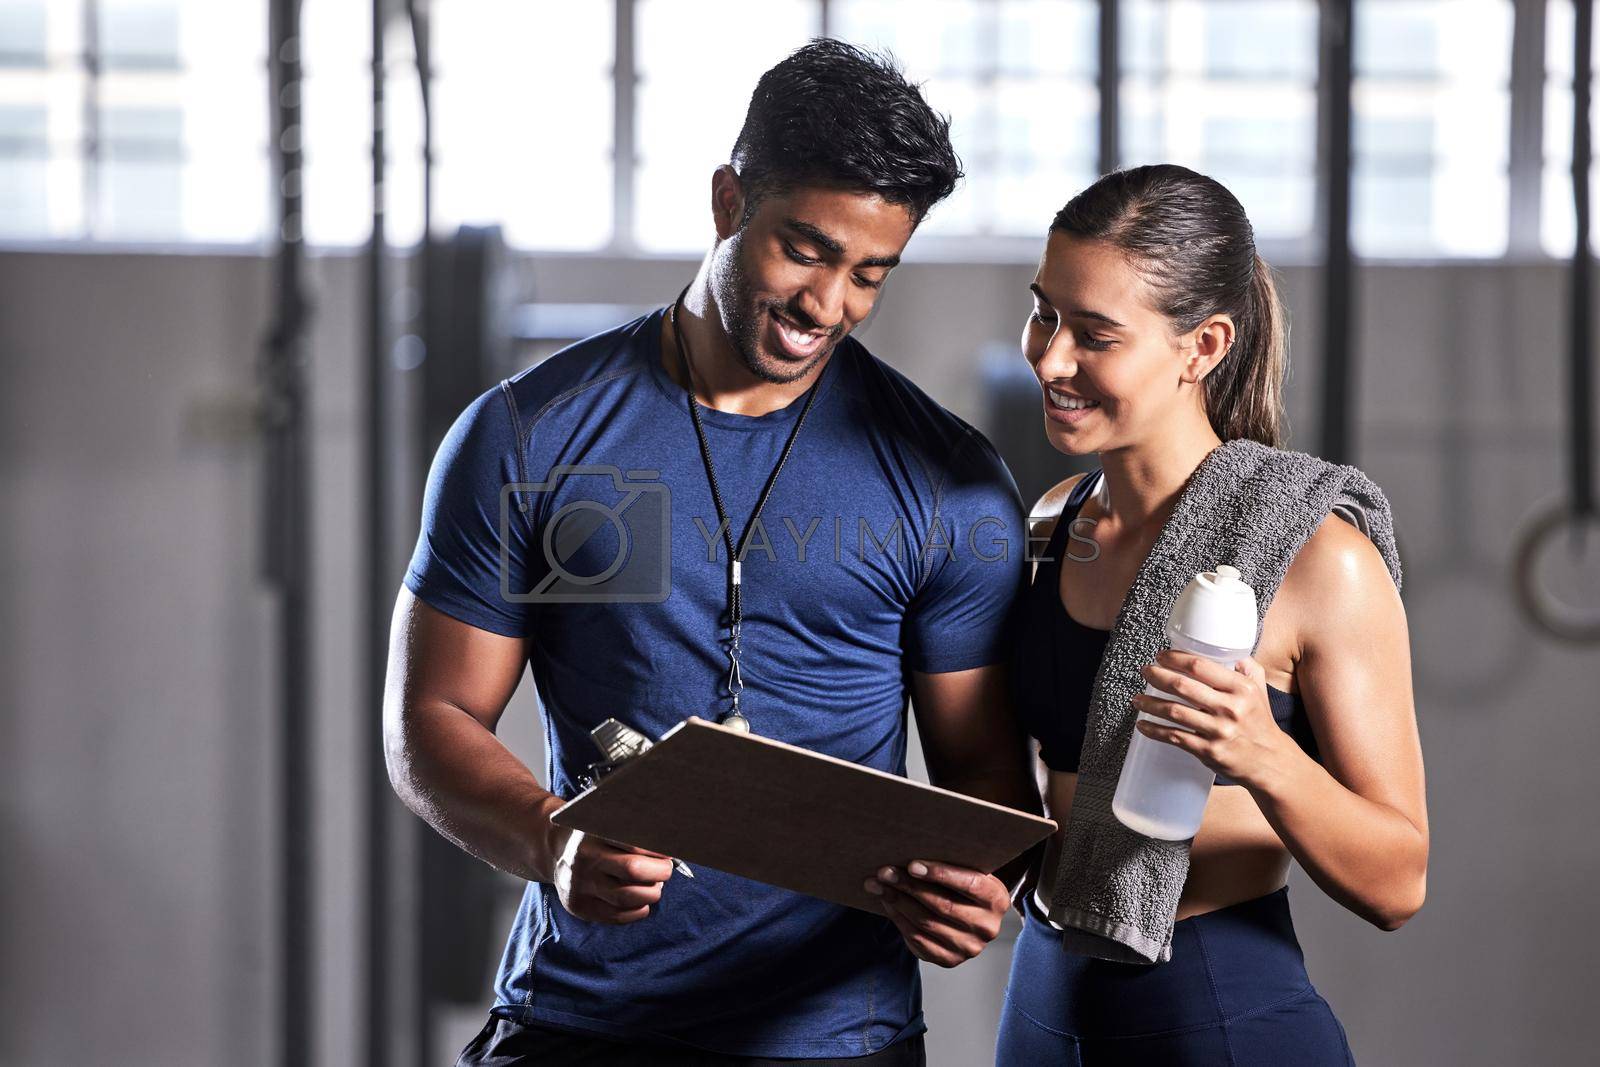 Royalty free image of Gym subscription, personal trainer and happy client talking and ready to fill in a membership form. Fitness coach discussing training, workout plan and progress in a health and wellness facility by YuriArcurs